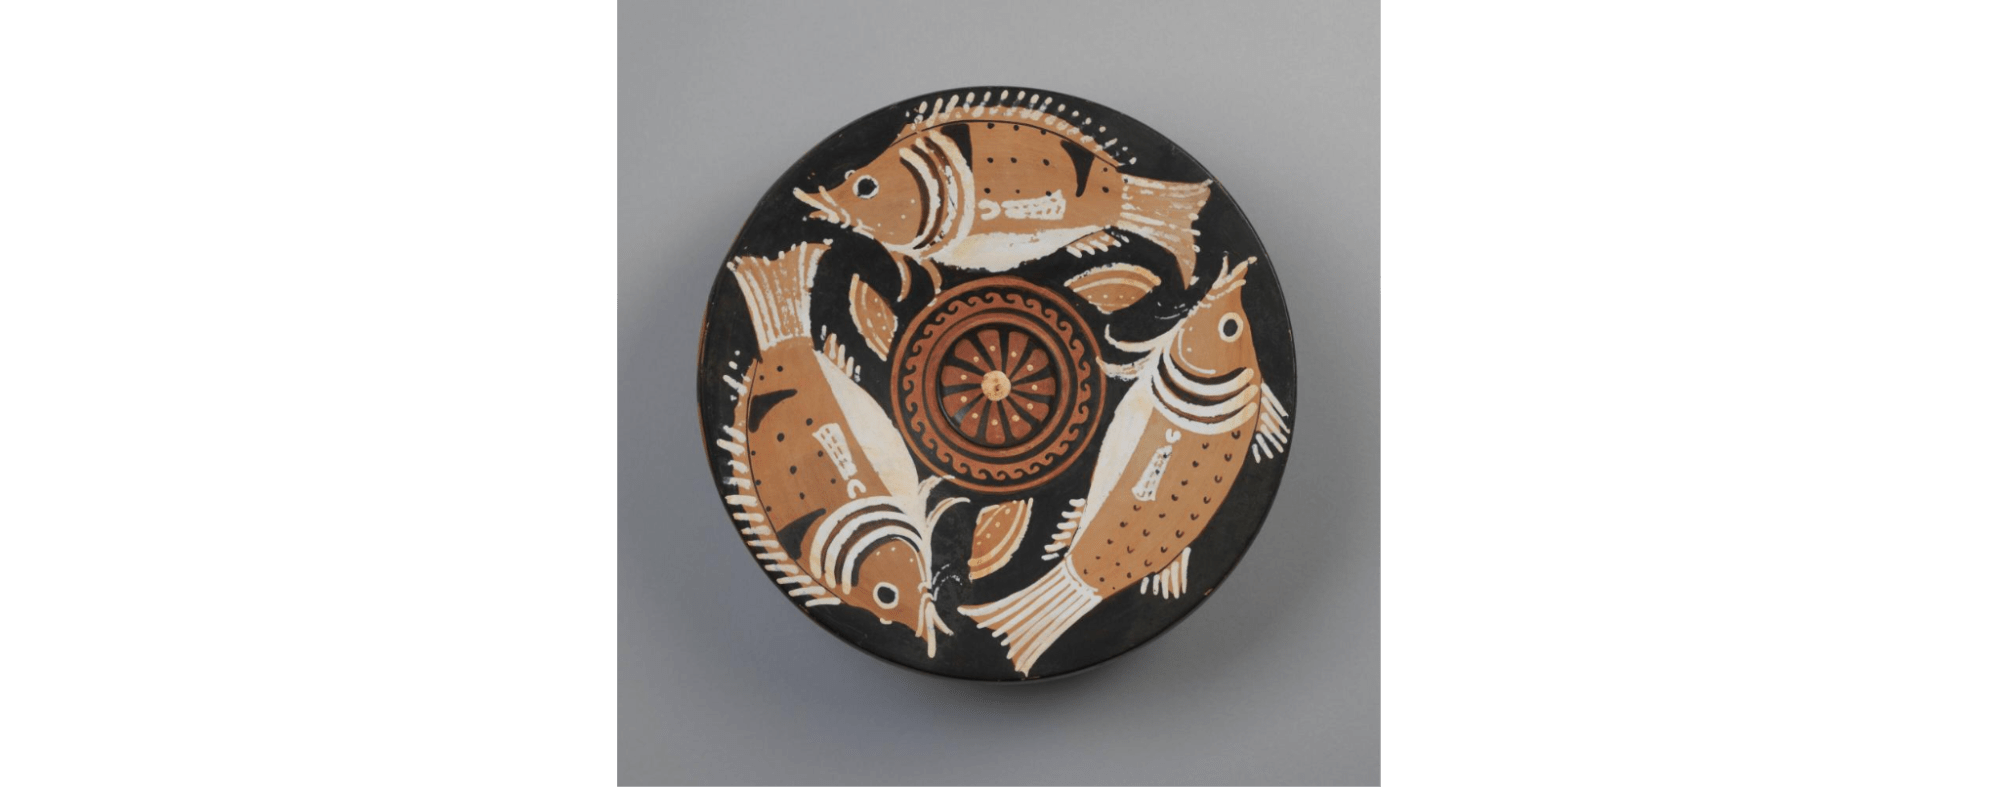 A plate decorated with three fish around a central rosette with wave patter.